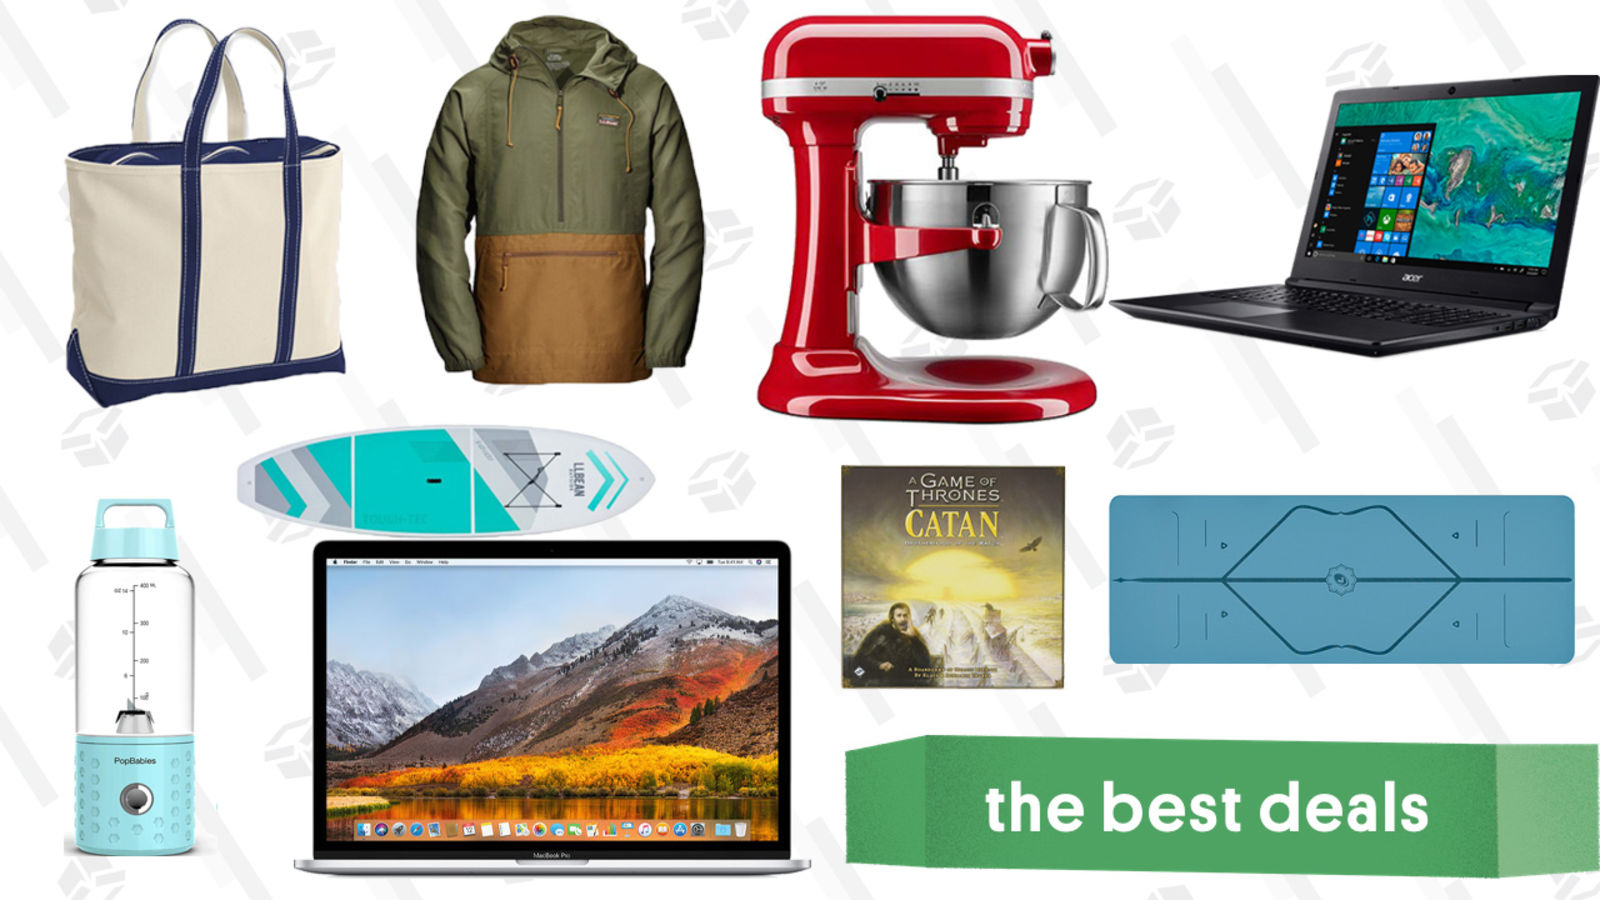 Monday's Best Deals: KitchenAid, Game of Thrones Catan, Refurb MacBooks, and More